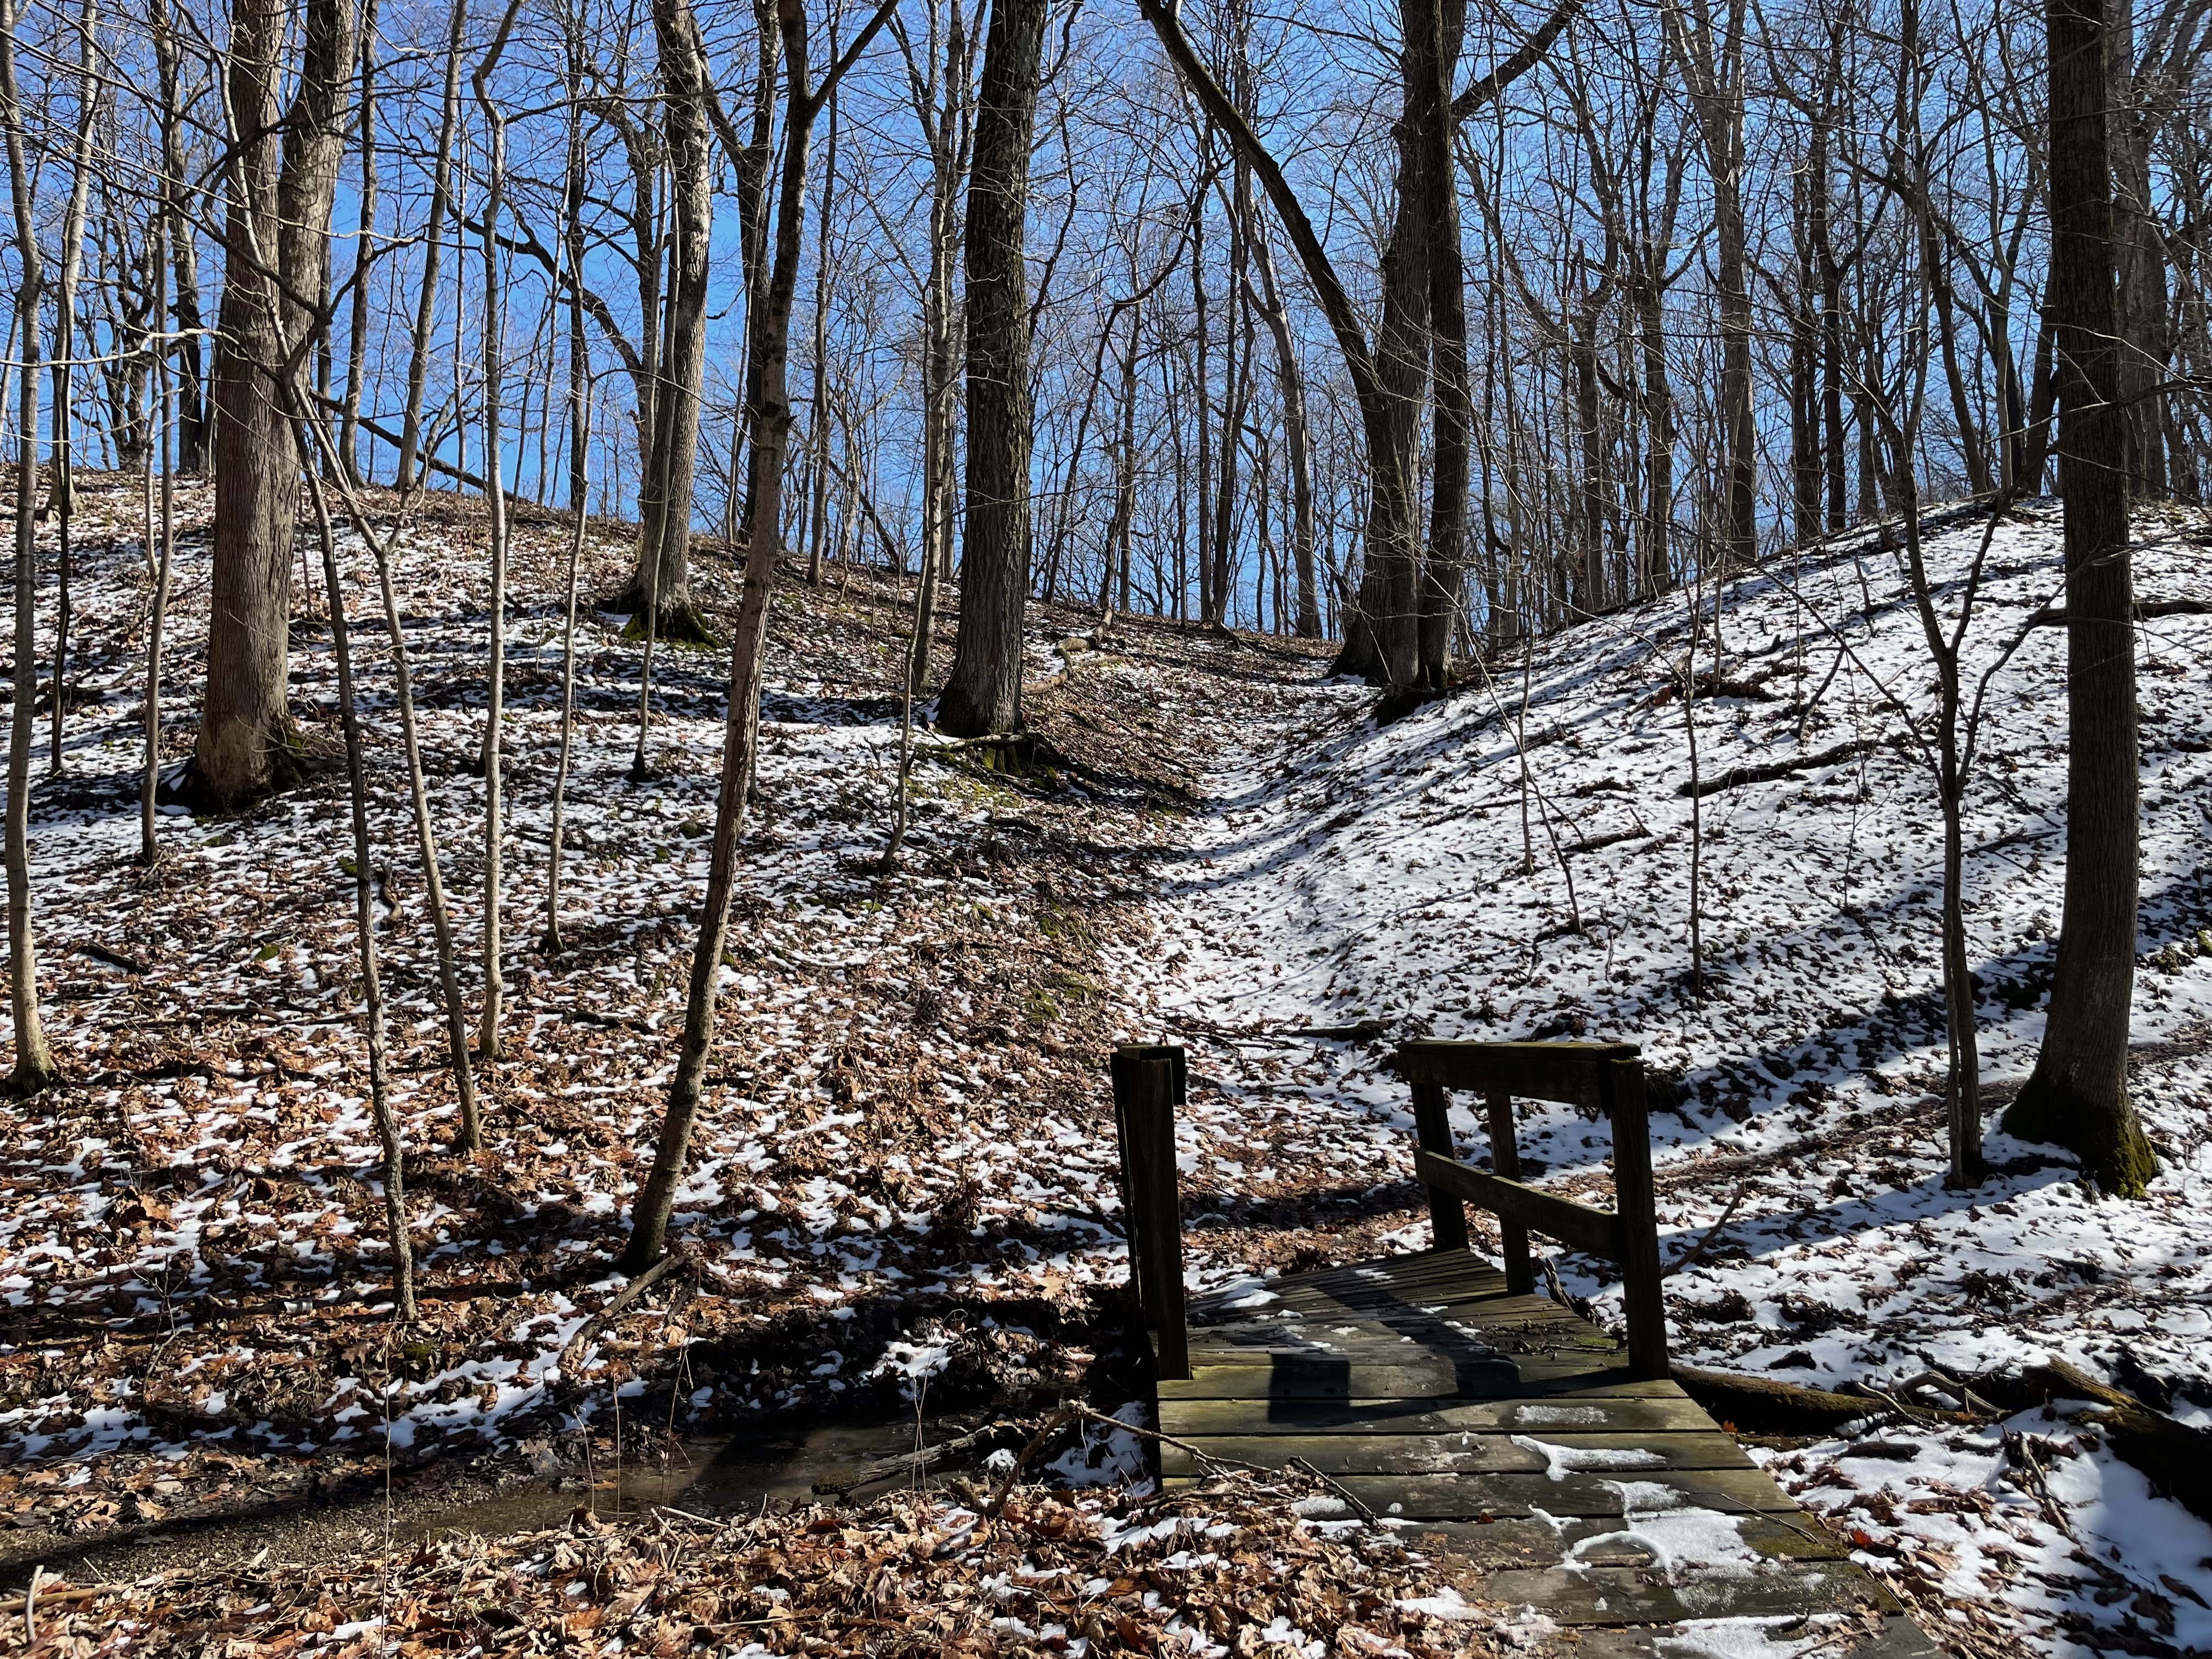 Photo of one of the many small wooden bridges along the North Fork Trail. There is snow on the ground and many small, thin trees. Main colors are brown, white, and blue sky in the background. 